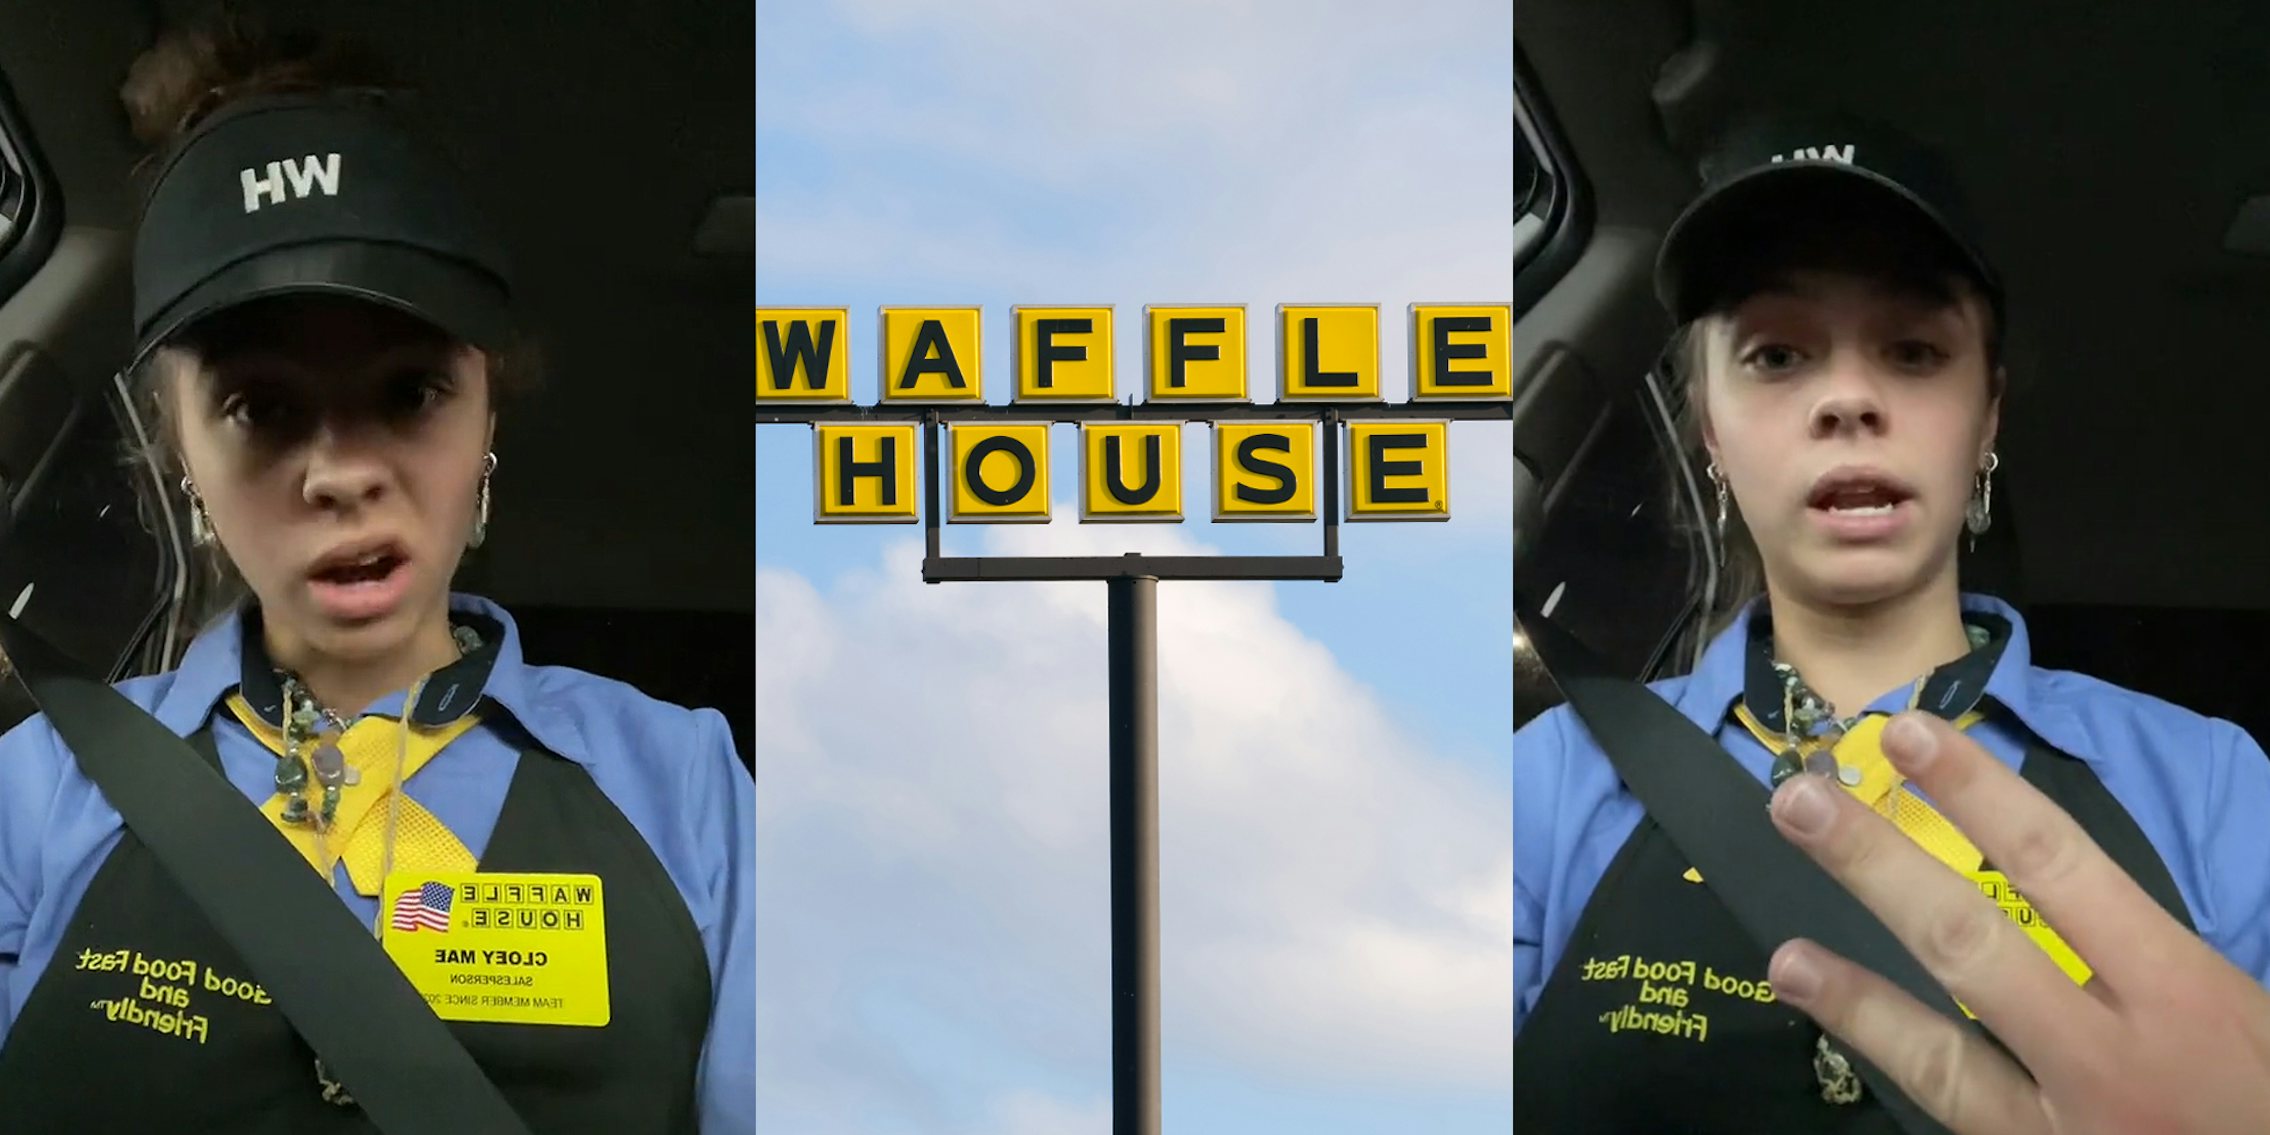 Waffle House server speaking in car (l) Waffle House sign in front of blue sky (c) Waffle House worker speaking in car holding up 3 fingers (r)